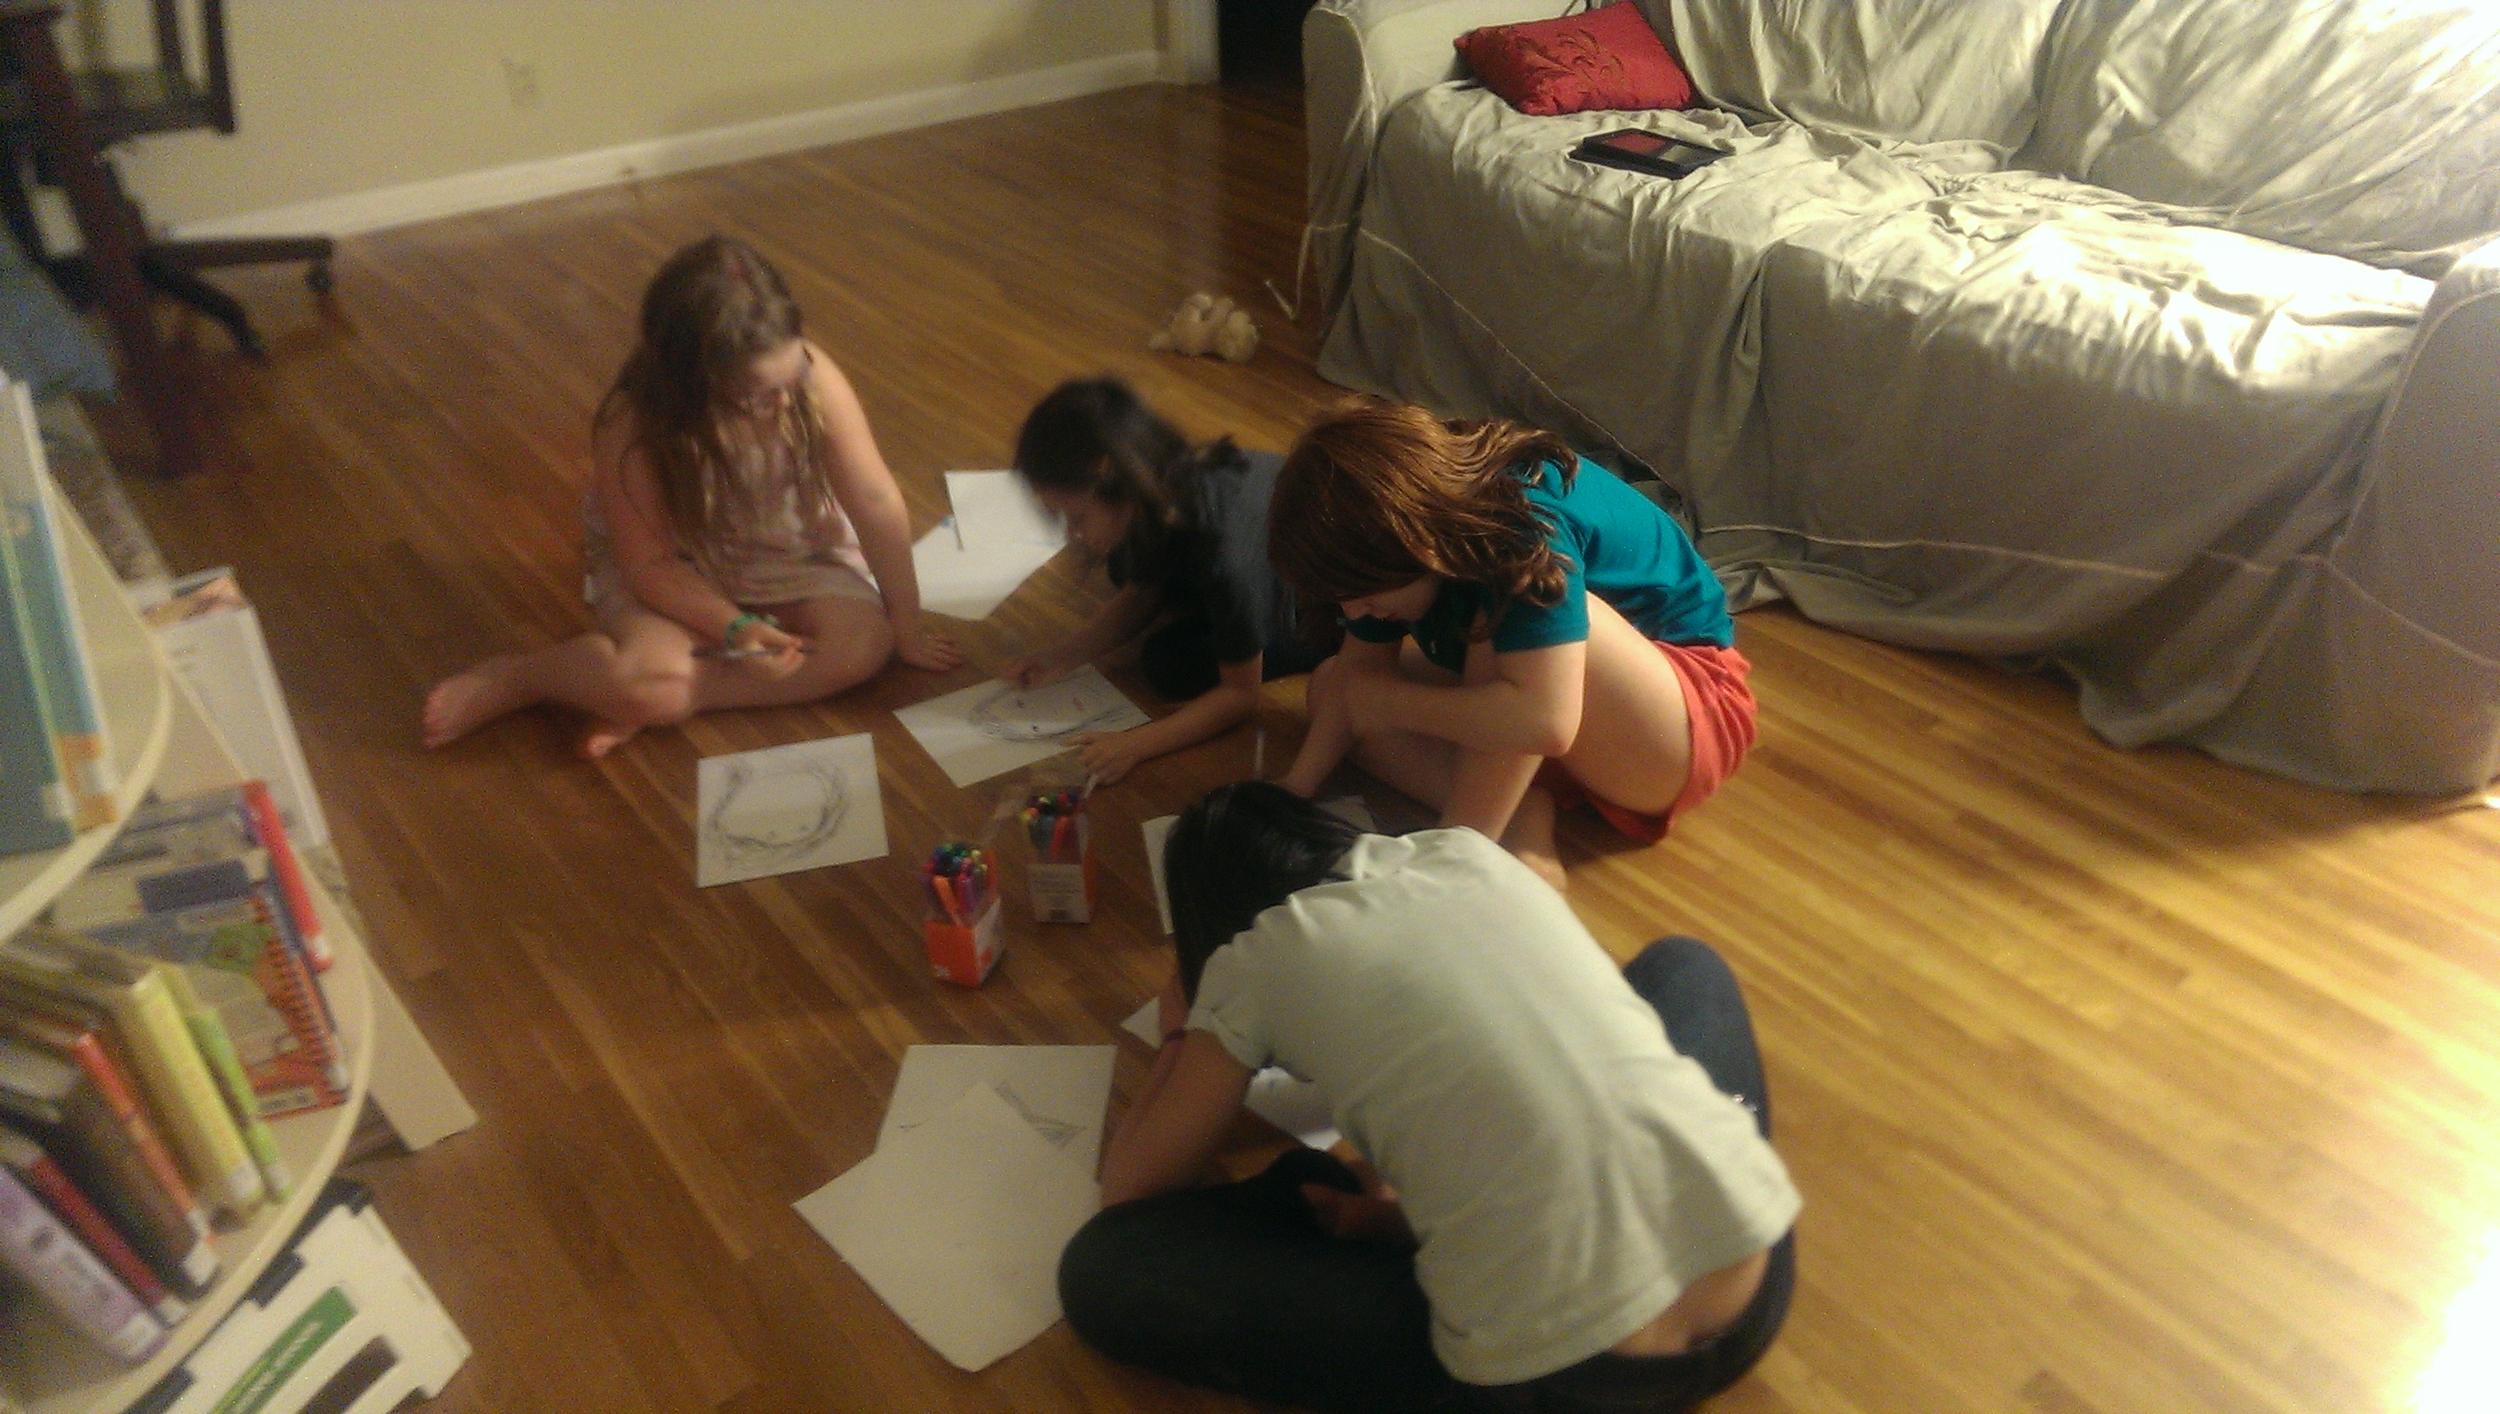 Crafting and creating together.